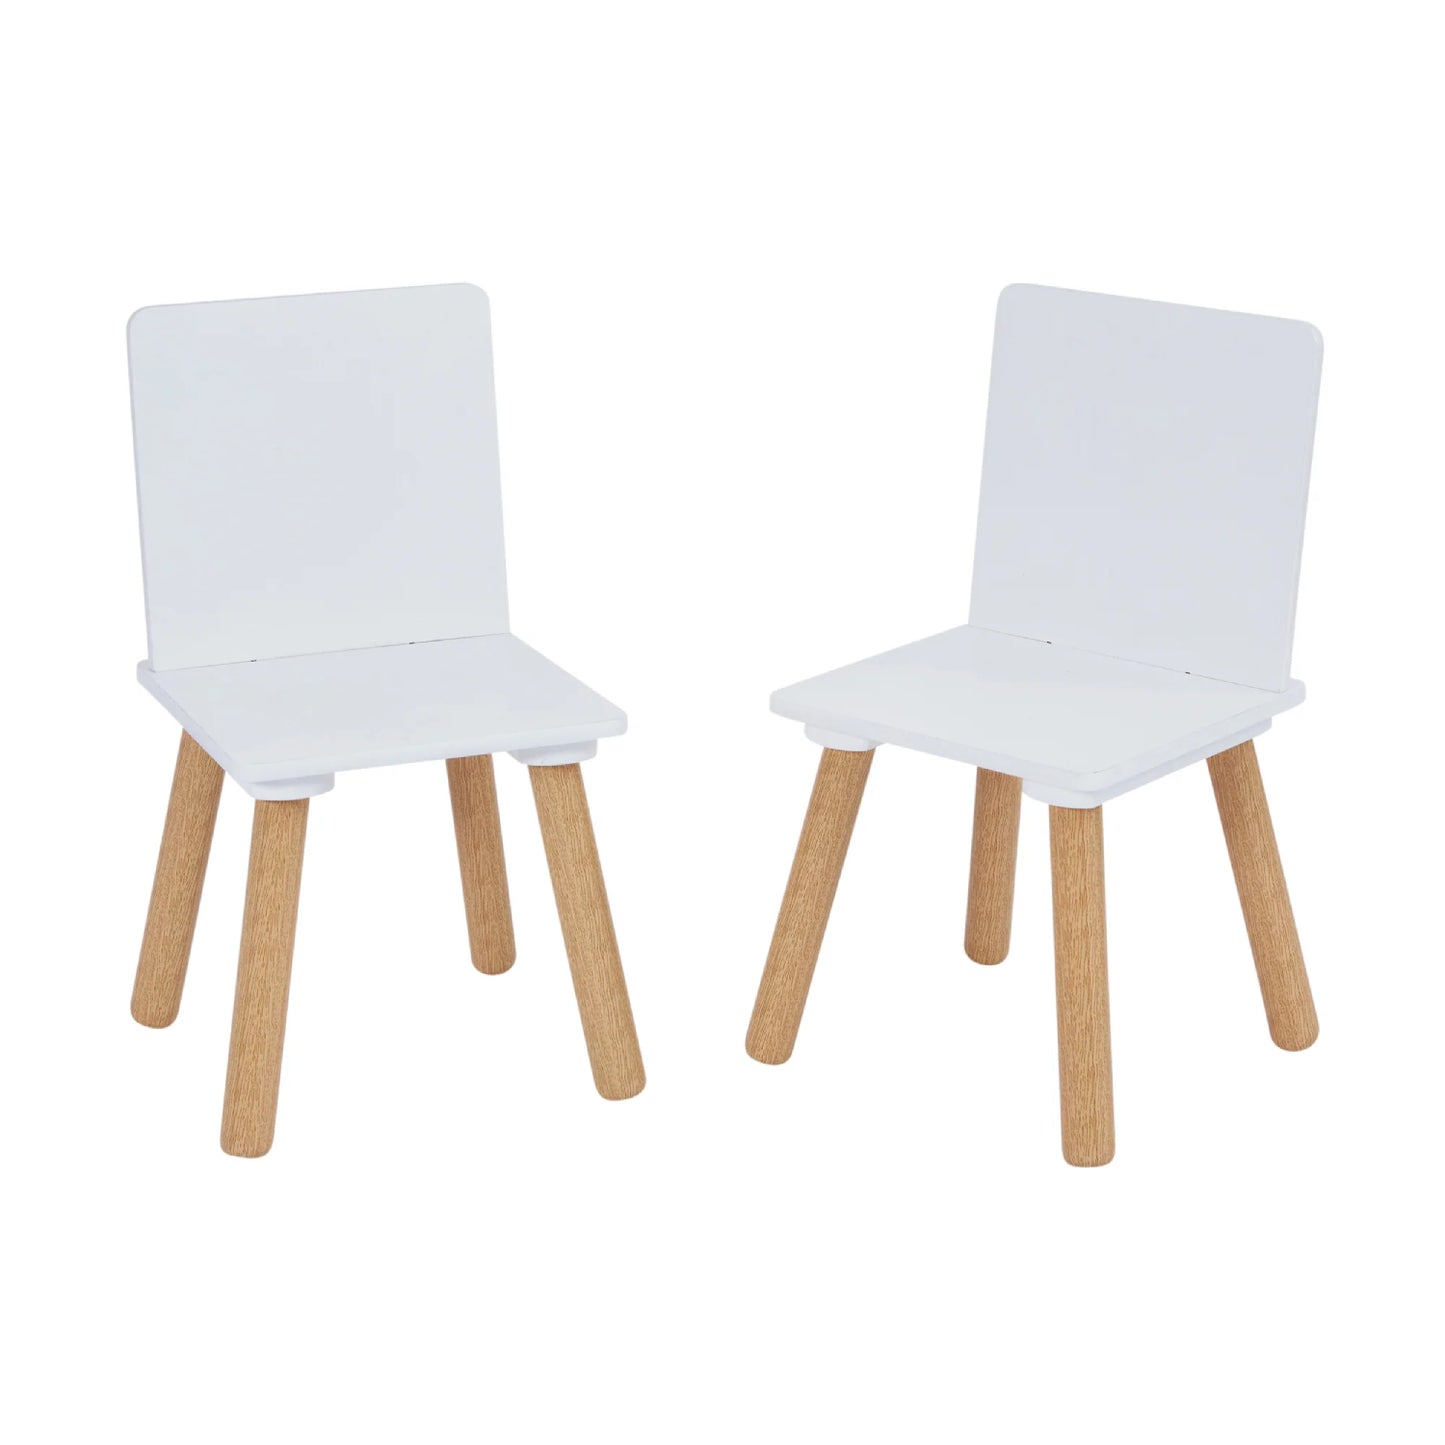 Kids White and Pinewood Table and Chair Set by Liberty House Toys